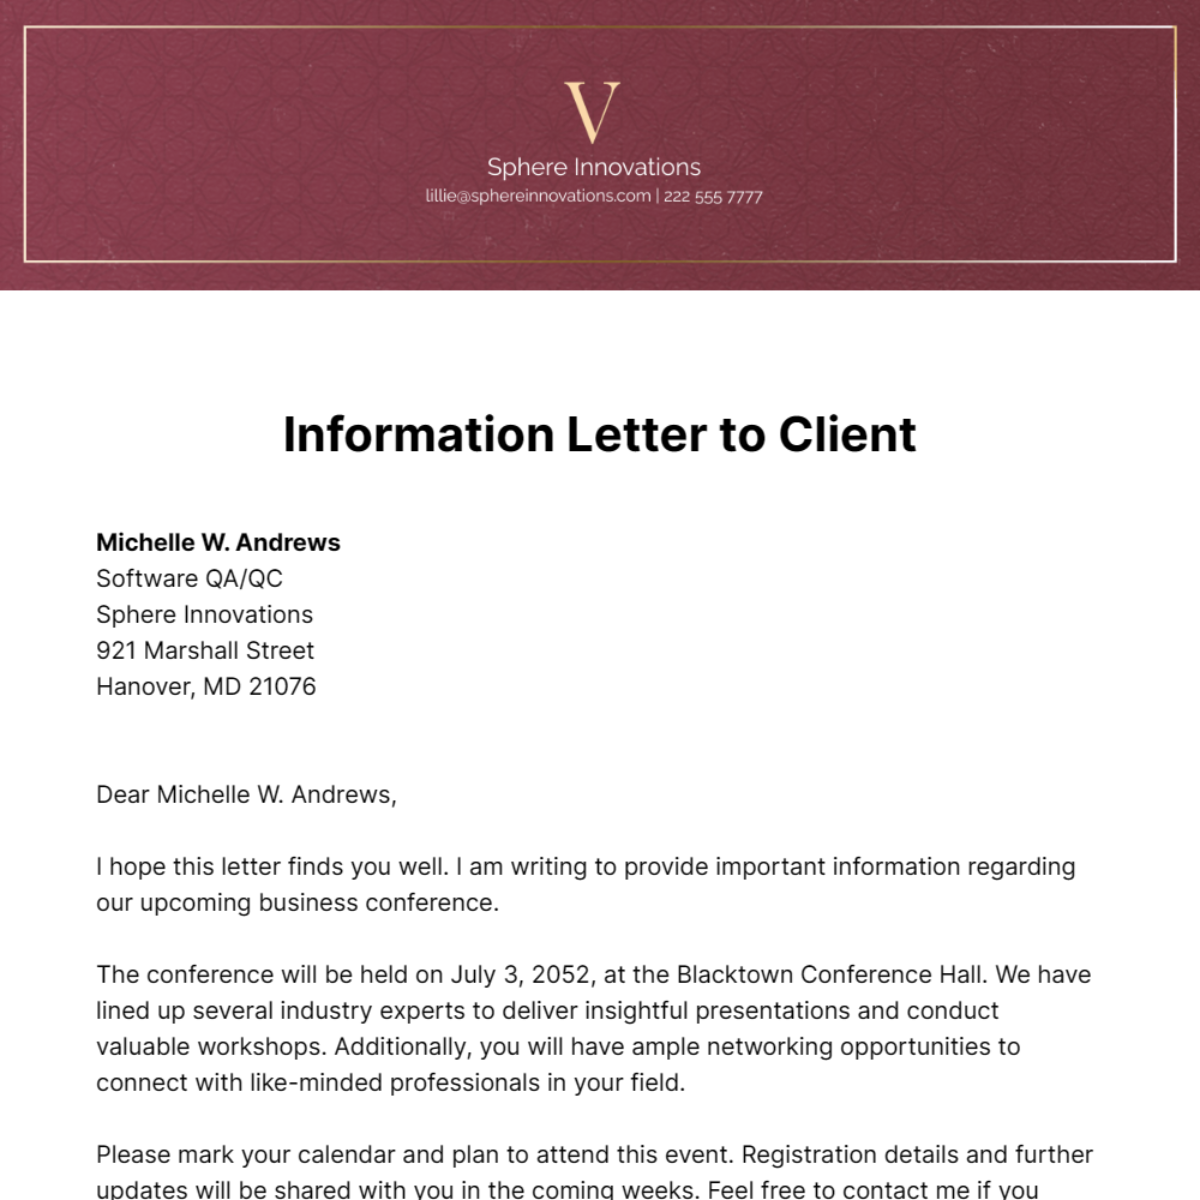 Information Letter to Client Template